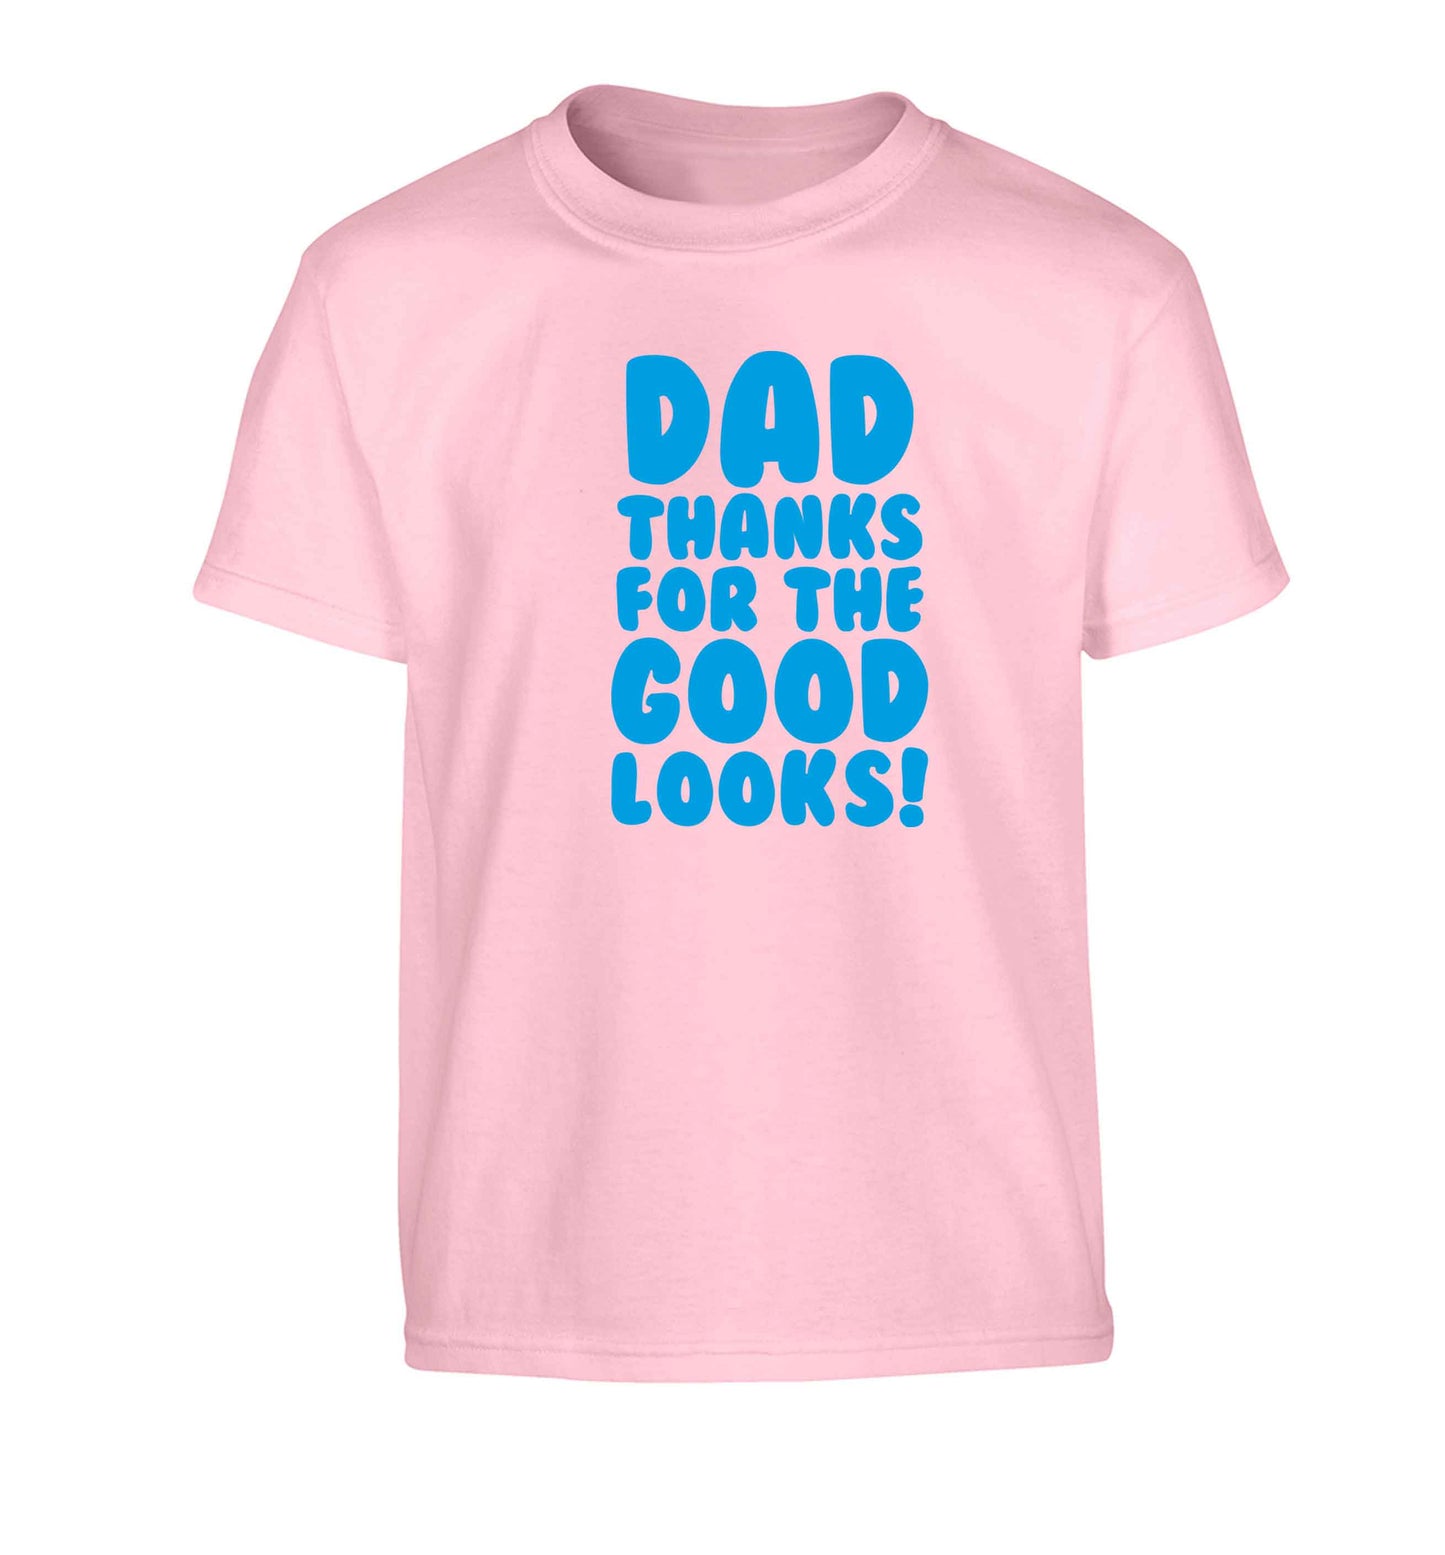 Dad thanks for the good looks Children's light pink Tshirt 12-13 Years